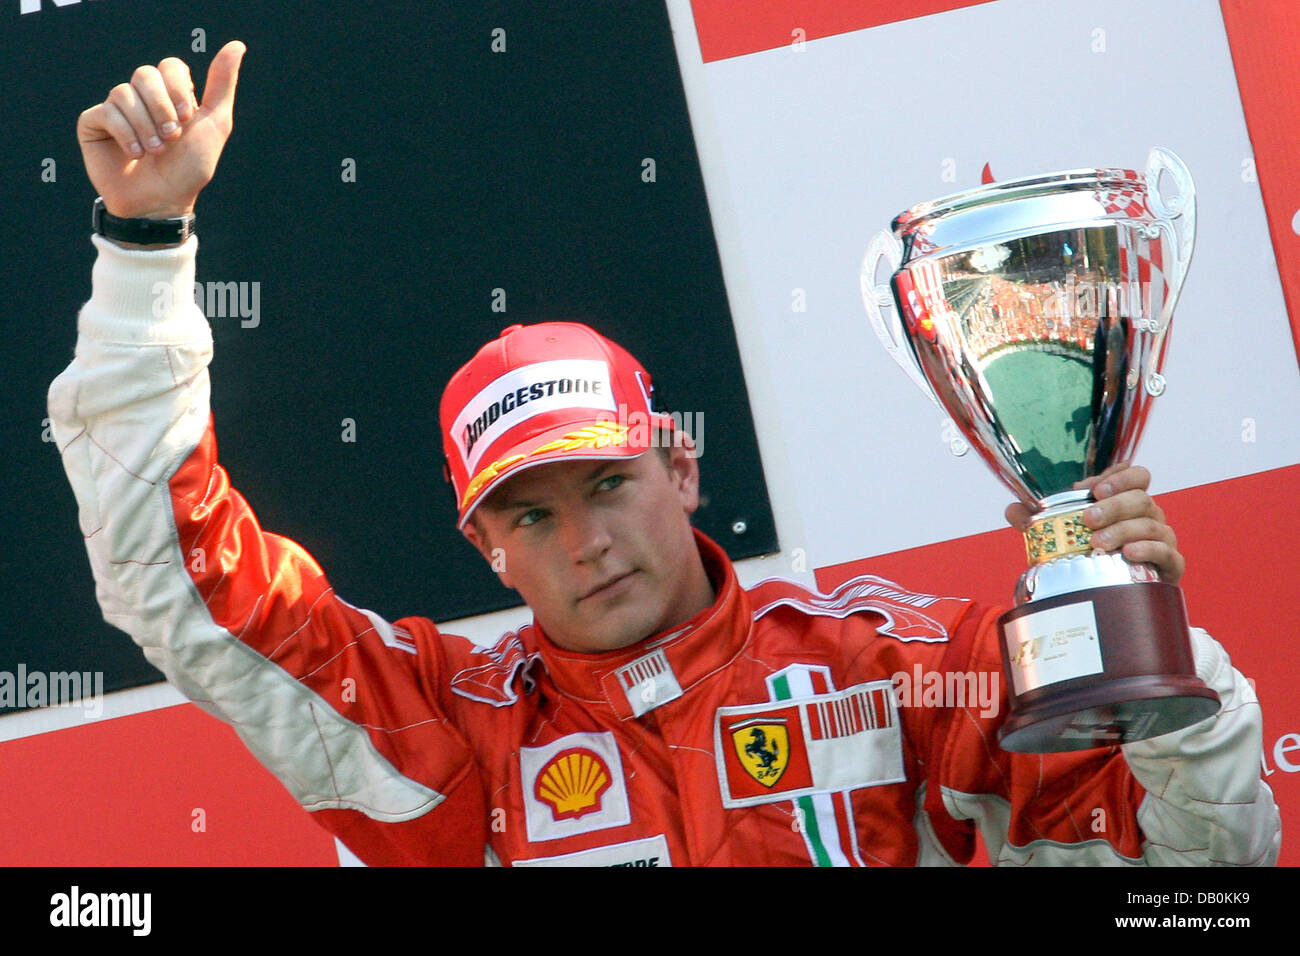 Third-placed Finnish Formula One pilot Kimi Raikkonen of Ferrari celebrates with his trophy as he stands on the podium after the Italian Grand Prix at the circuit in Monza, Italy, 09 September 2007. Photo: Jens Buettner Stock Photo